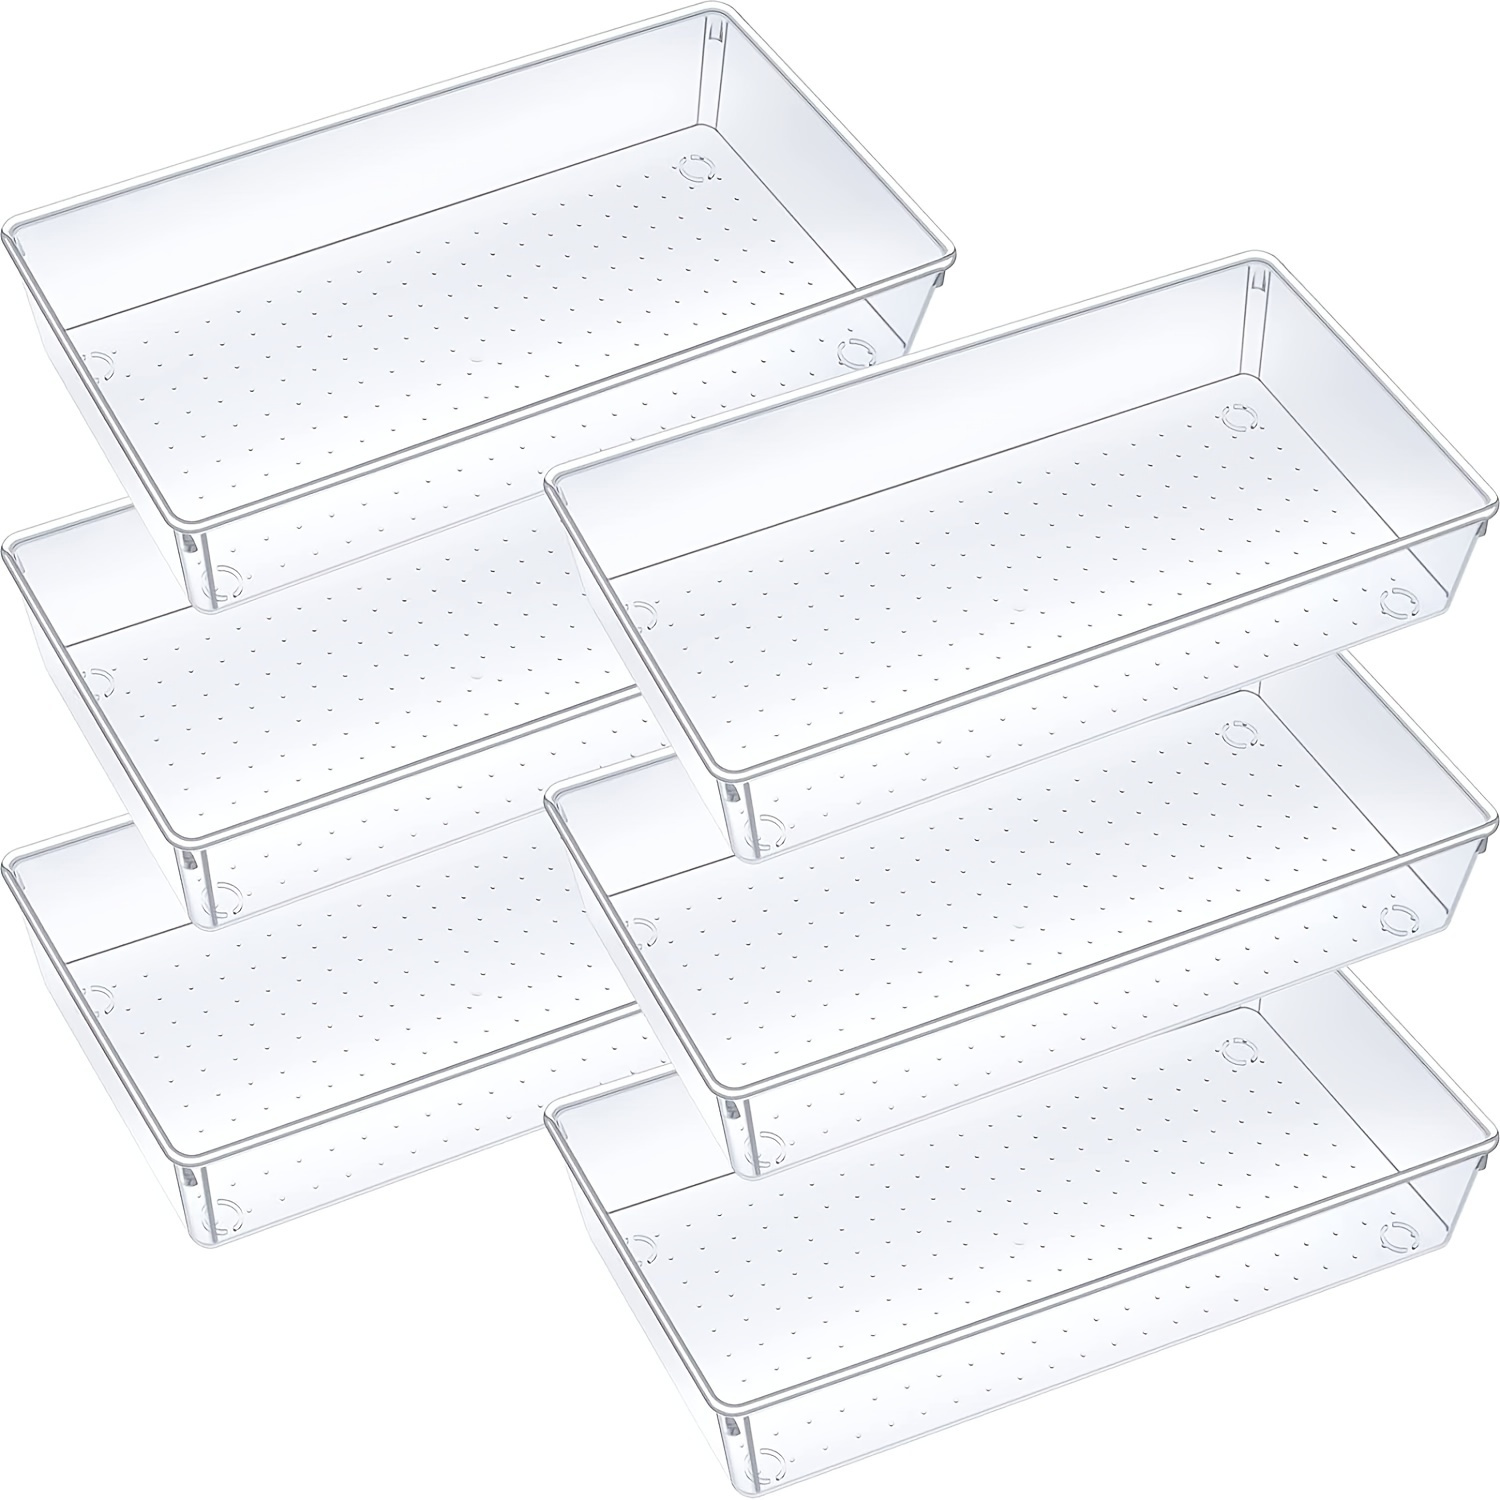 Clear Acrylic Tray Acrylic Serving Tray Simple Modern Transparent